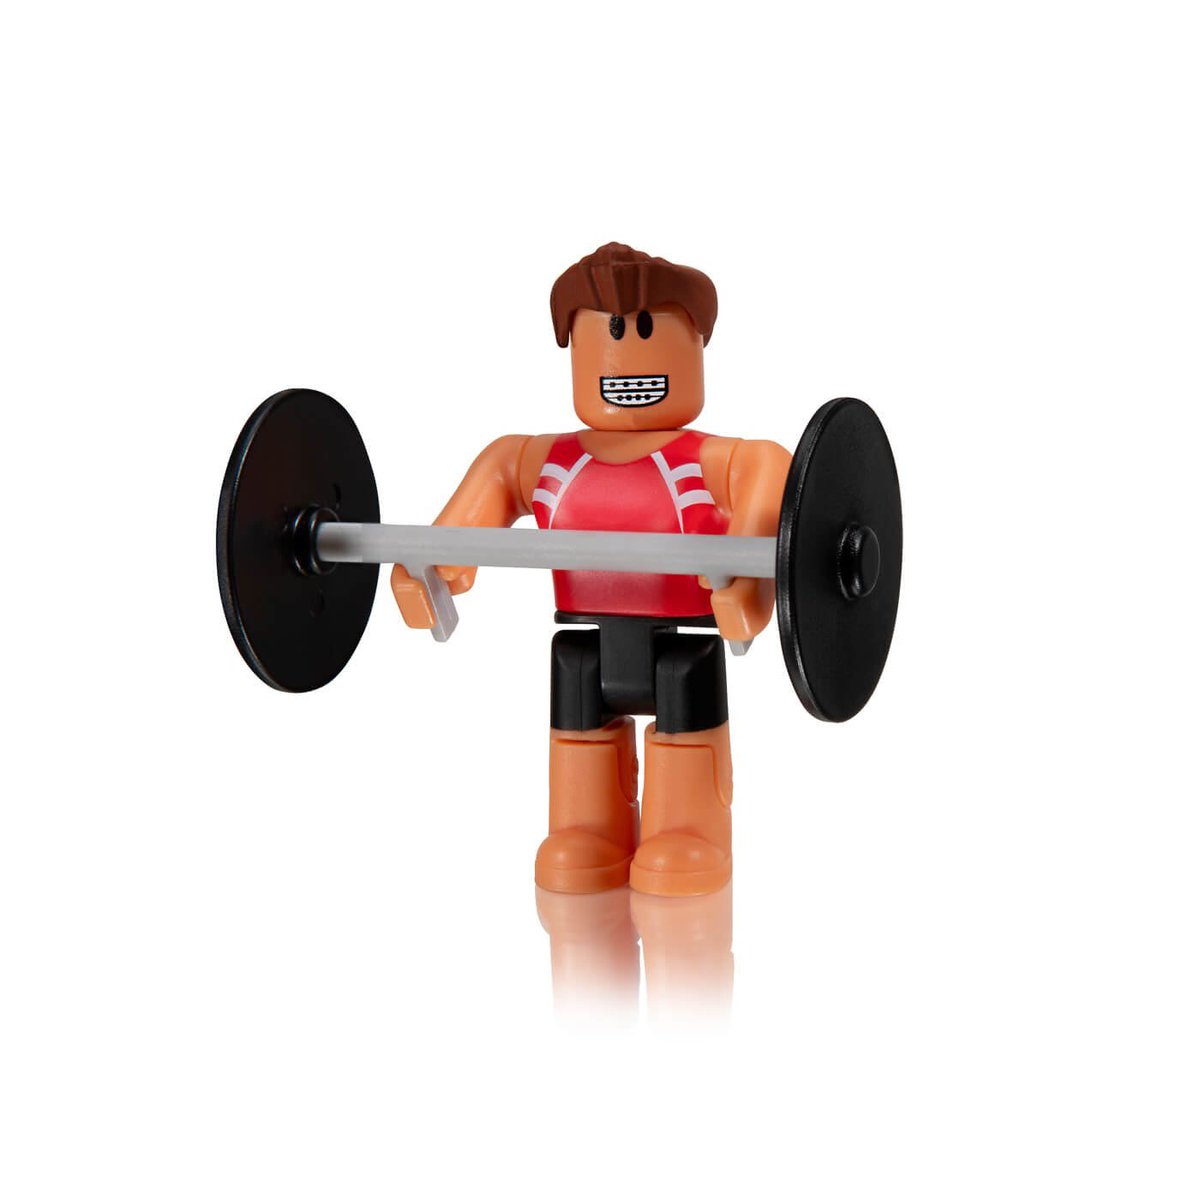 Roblox Gymnastics On Twitter Very Happy To Announce The Release Of Not One But Two Gymnastics Roblox Toys You Can Find Dylan In The Red Celebrity Series 5 Boxes And Olivia In - olivia roblox